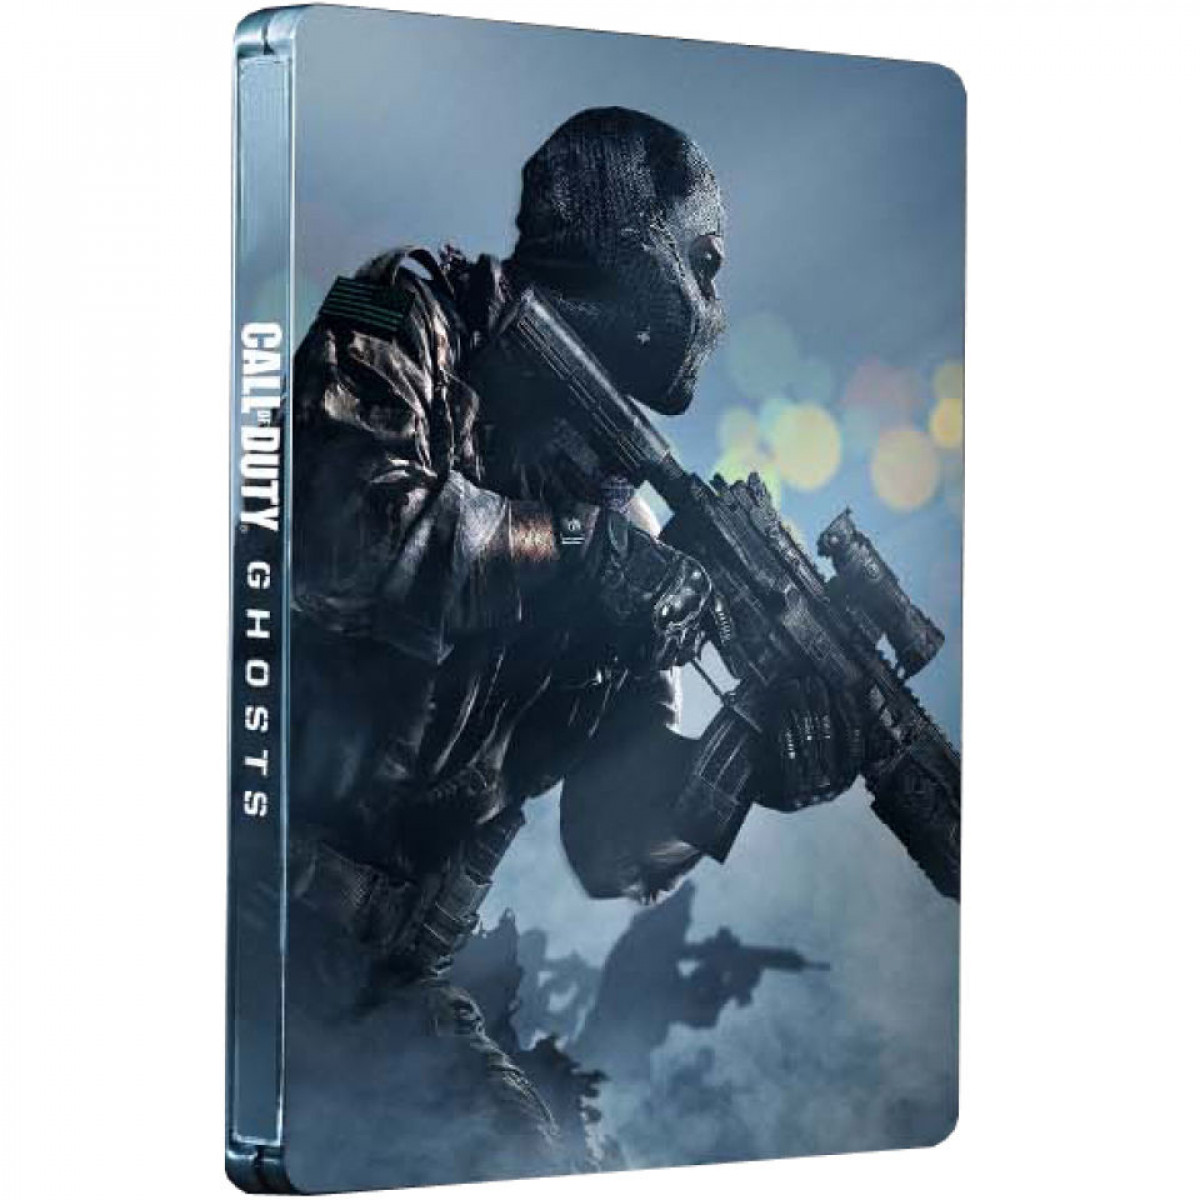 Call of Duty Ghosts Limited Steelbook Edition